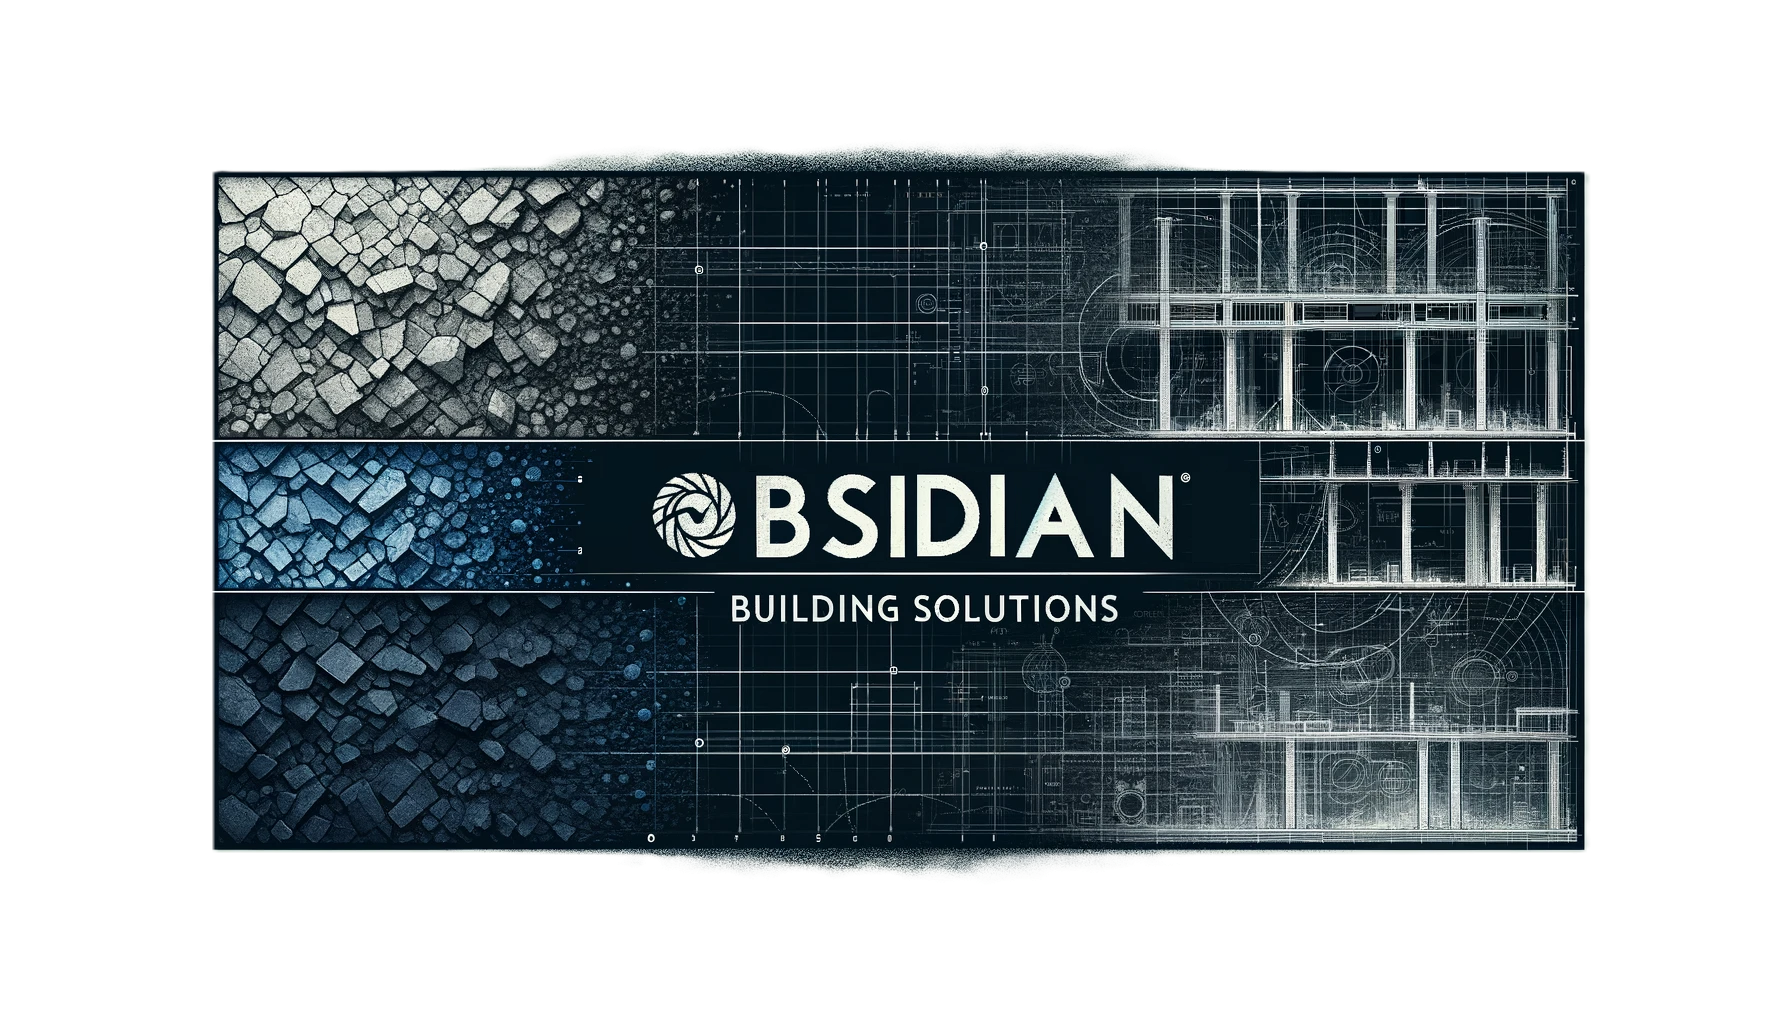 OBSIDIAN: BUILDING SOLUTIONS